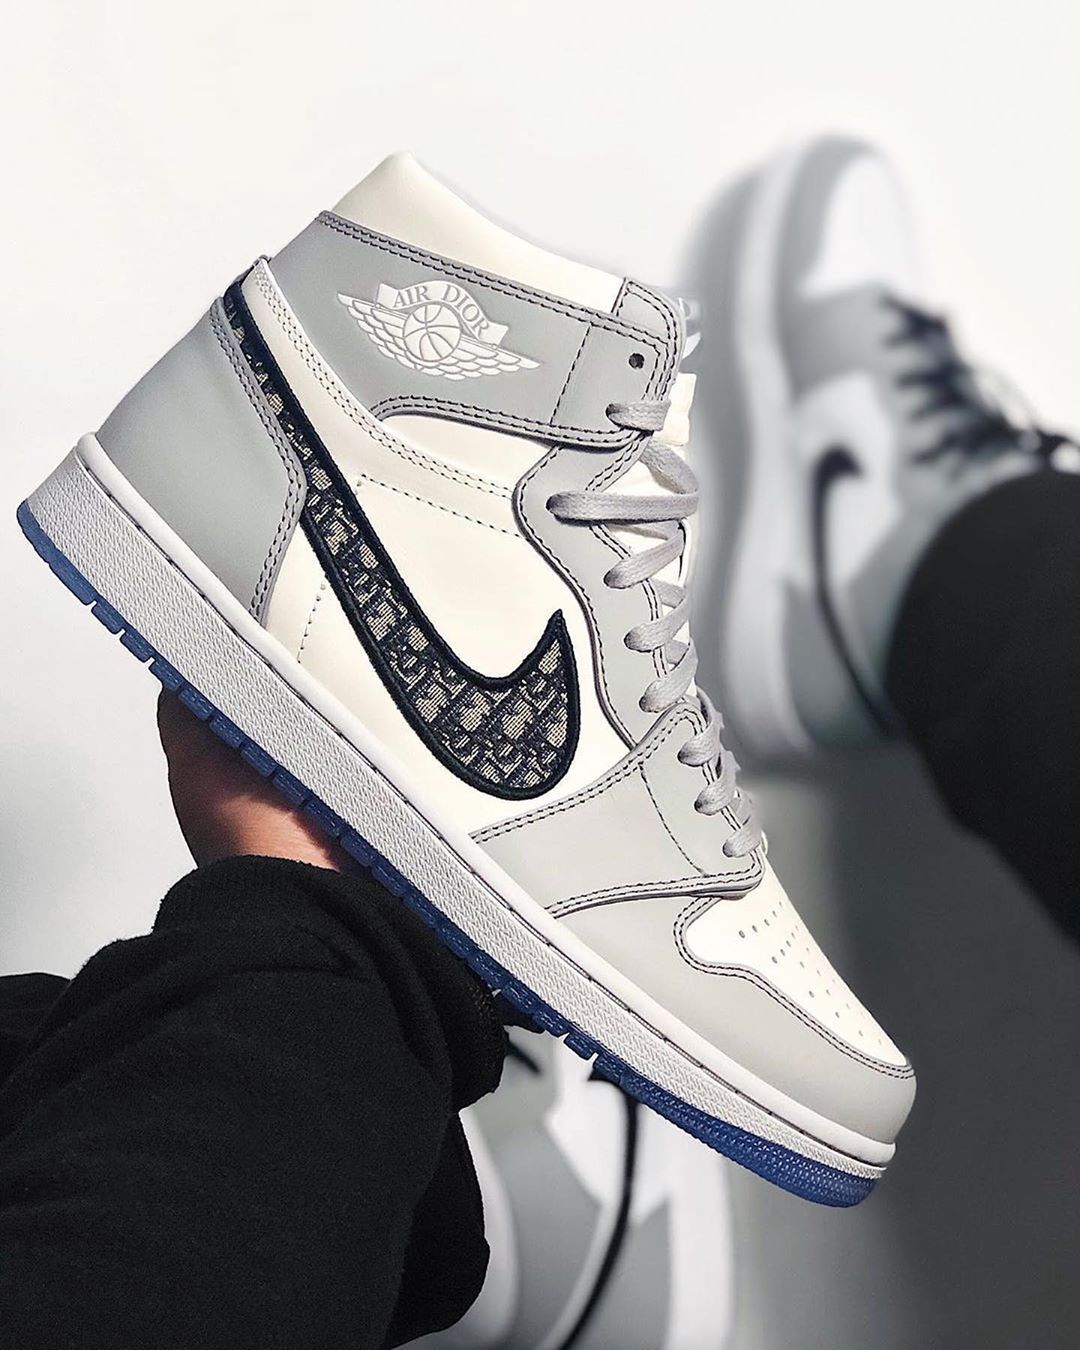 The Nike X Dior Air Jordan 1 Raffles Have Opened for Entry